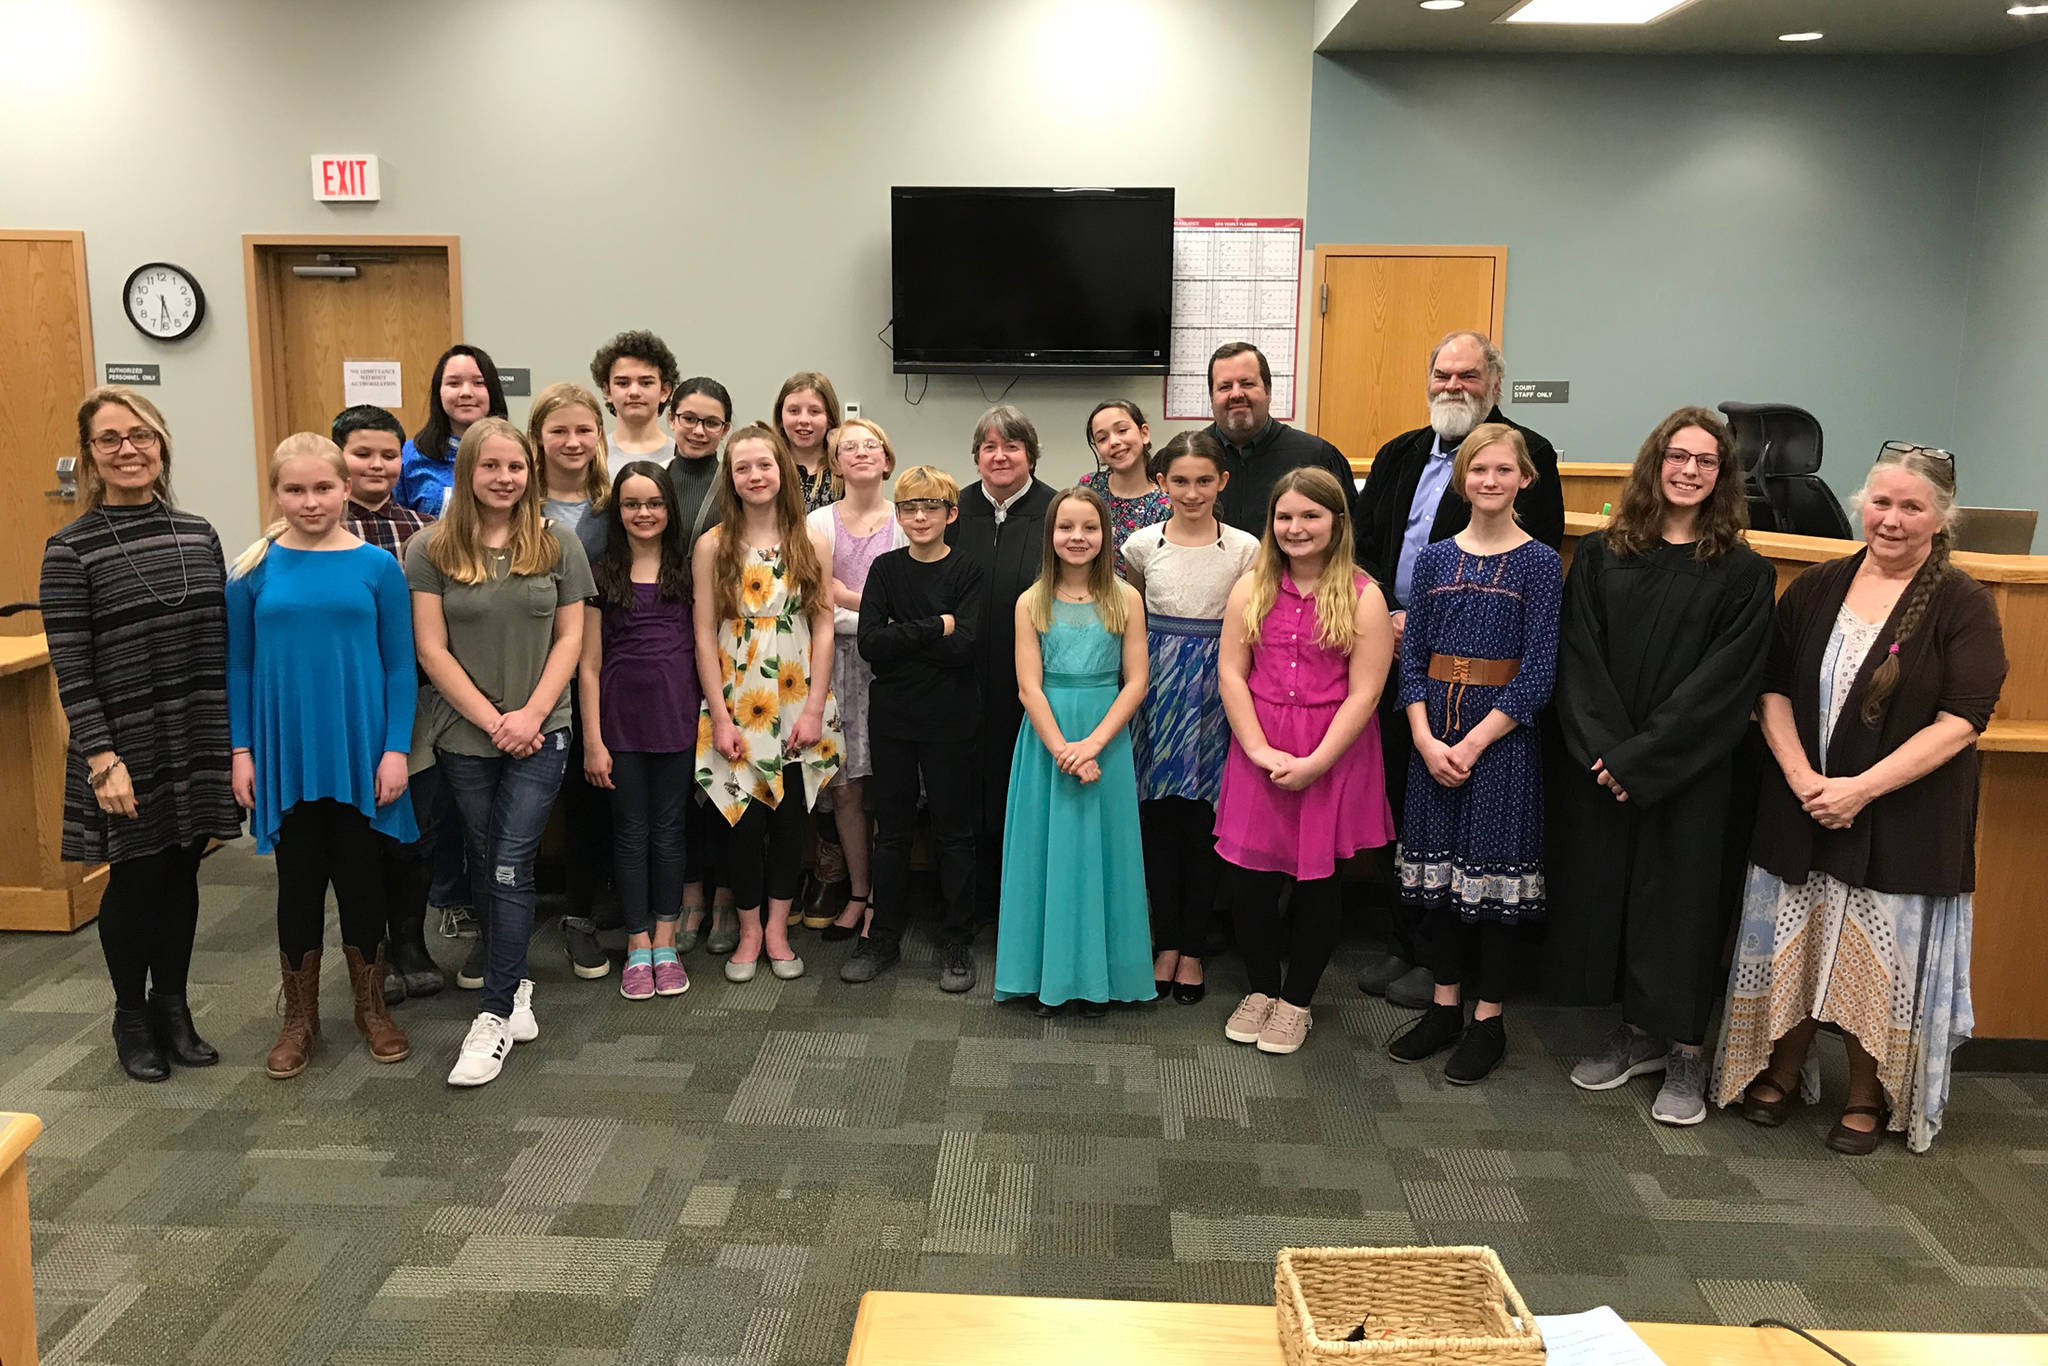 West Homer Elementary School teacher Becky Paul (far left), Superior Court Judge is Jason Gist (back), Homer Mayor Ken Castner (back, right), and Kenai Peninsula Youth Court Director Ginny Espenshade (far right) celebrate students from the school during a swearing-in ceremony on March 27, 2019 at the Homer Courthouse in Homer, Alaska. (Photo courtesy Becky Paul)